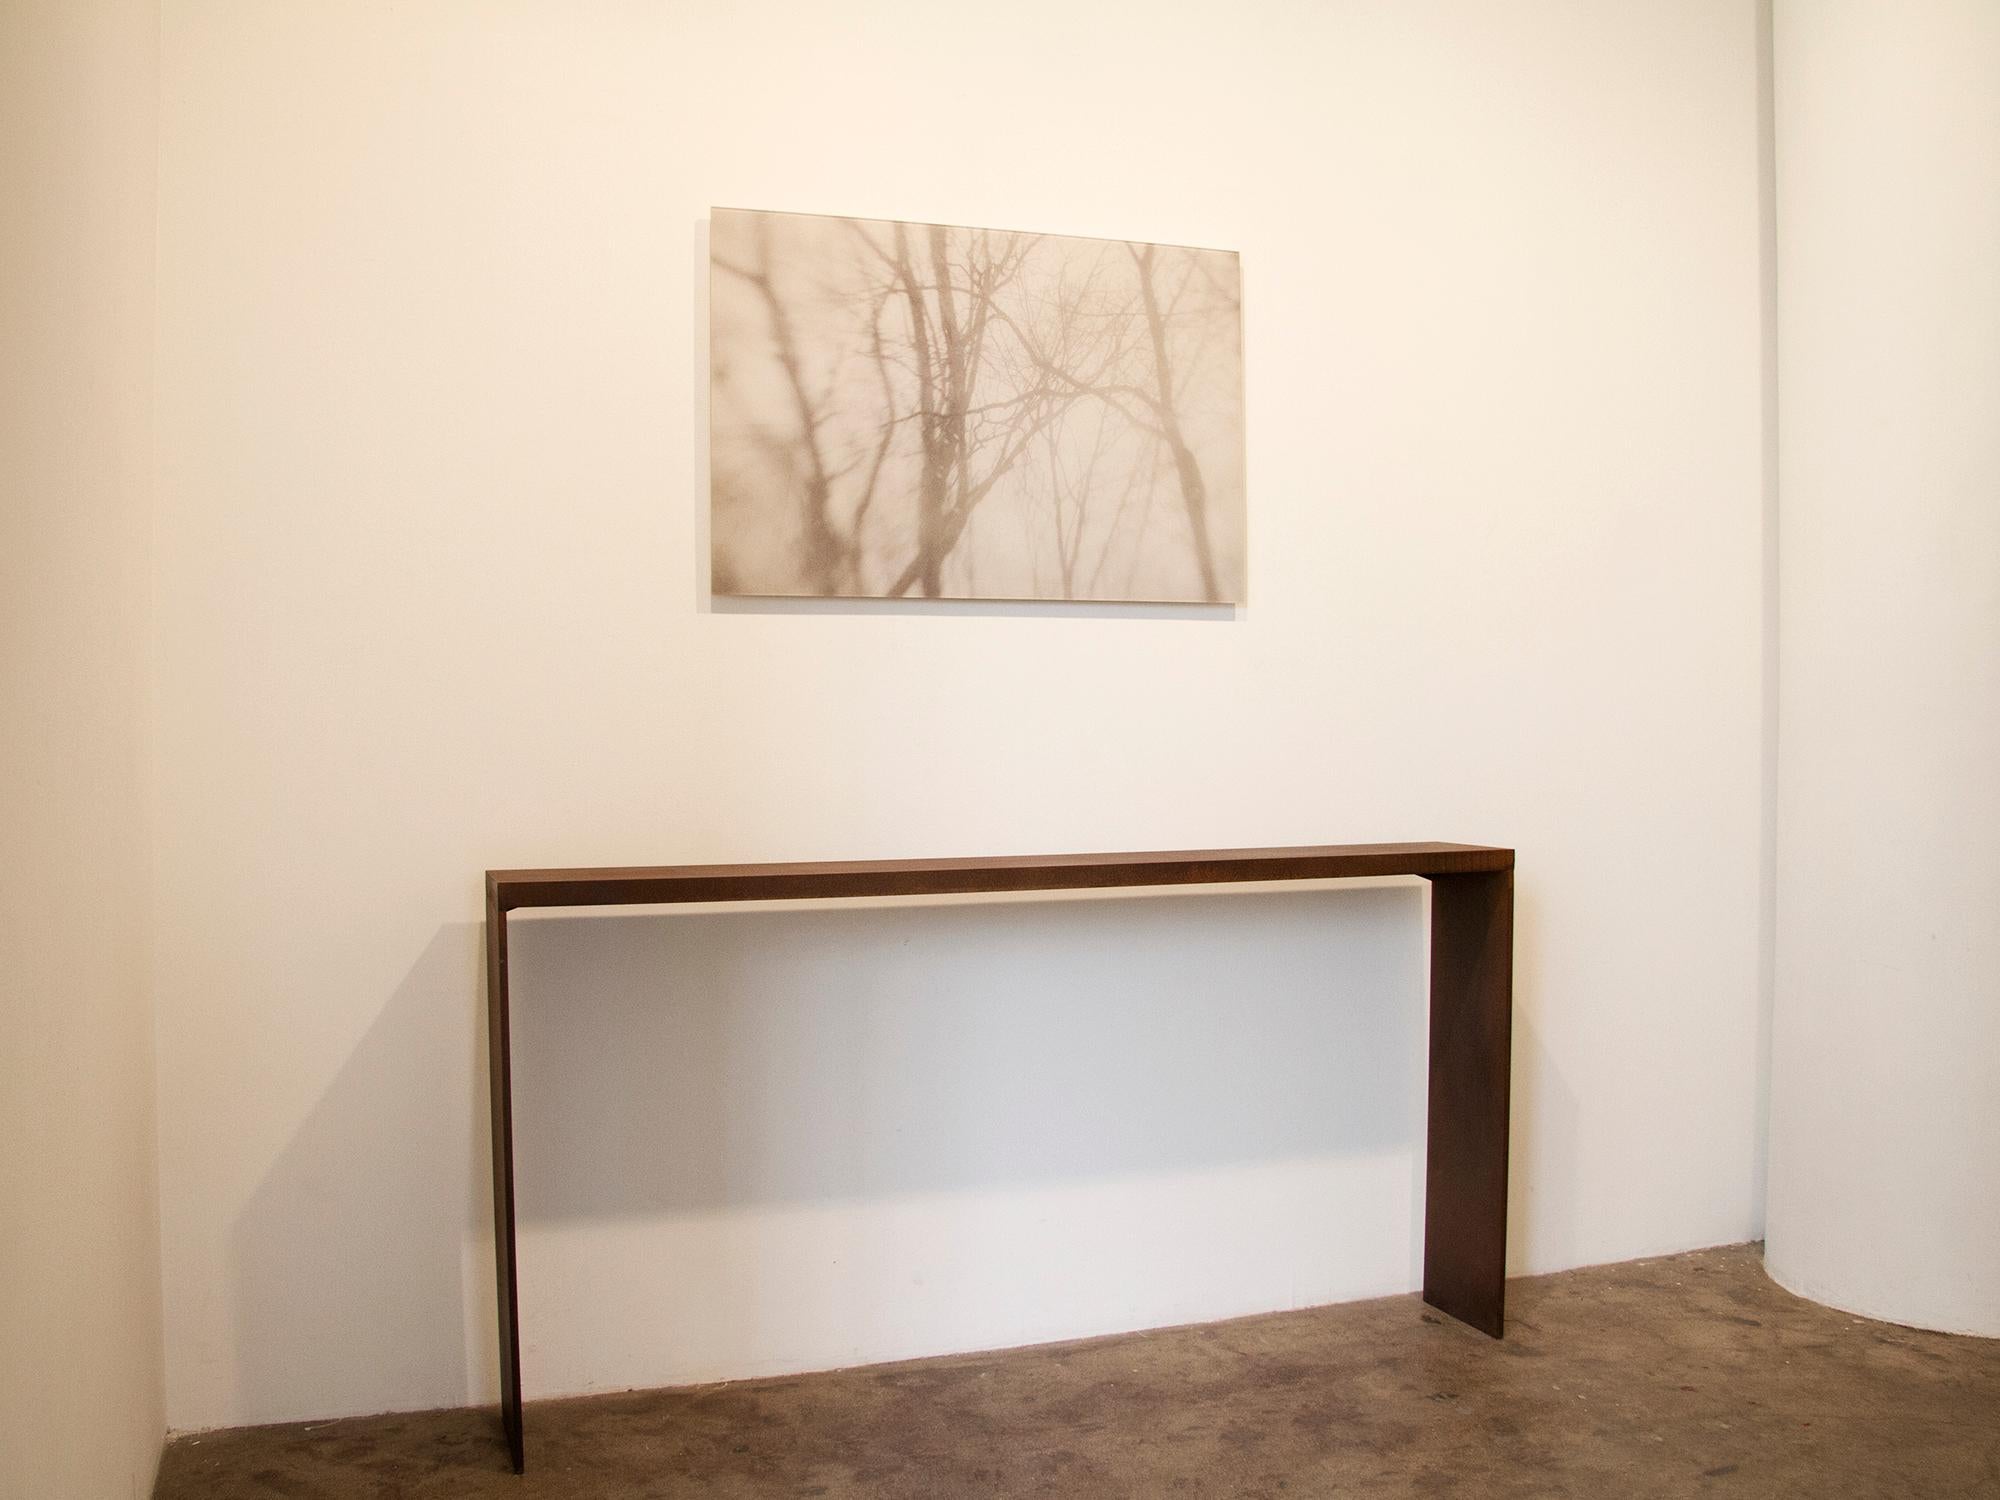 Eric Slayton Corten Steel Console Table, Plate Series, 2010 In Excellent Condition For Sale In New York, NY